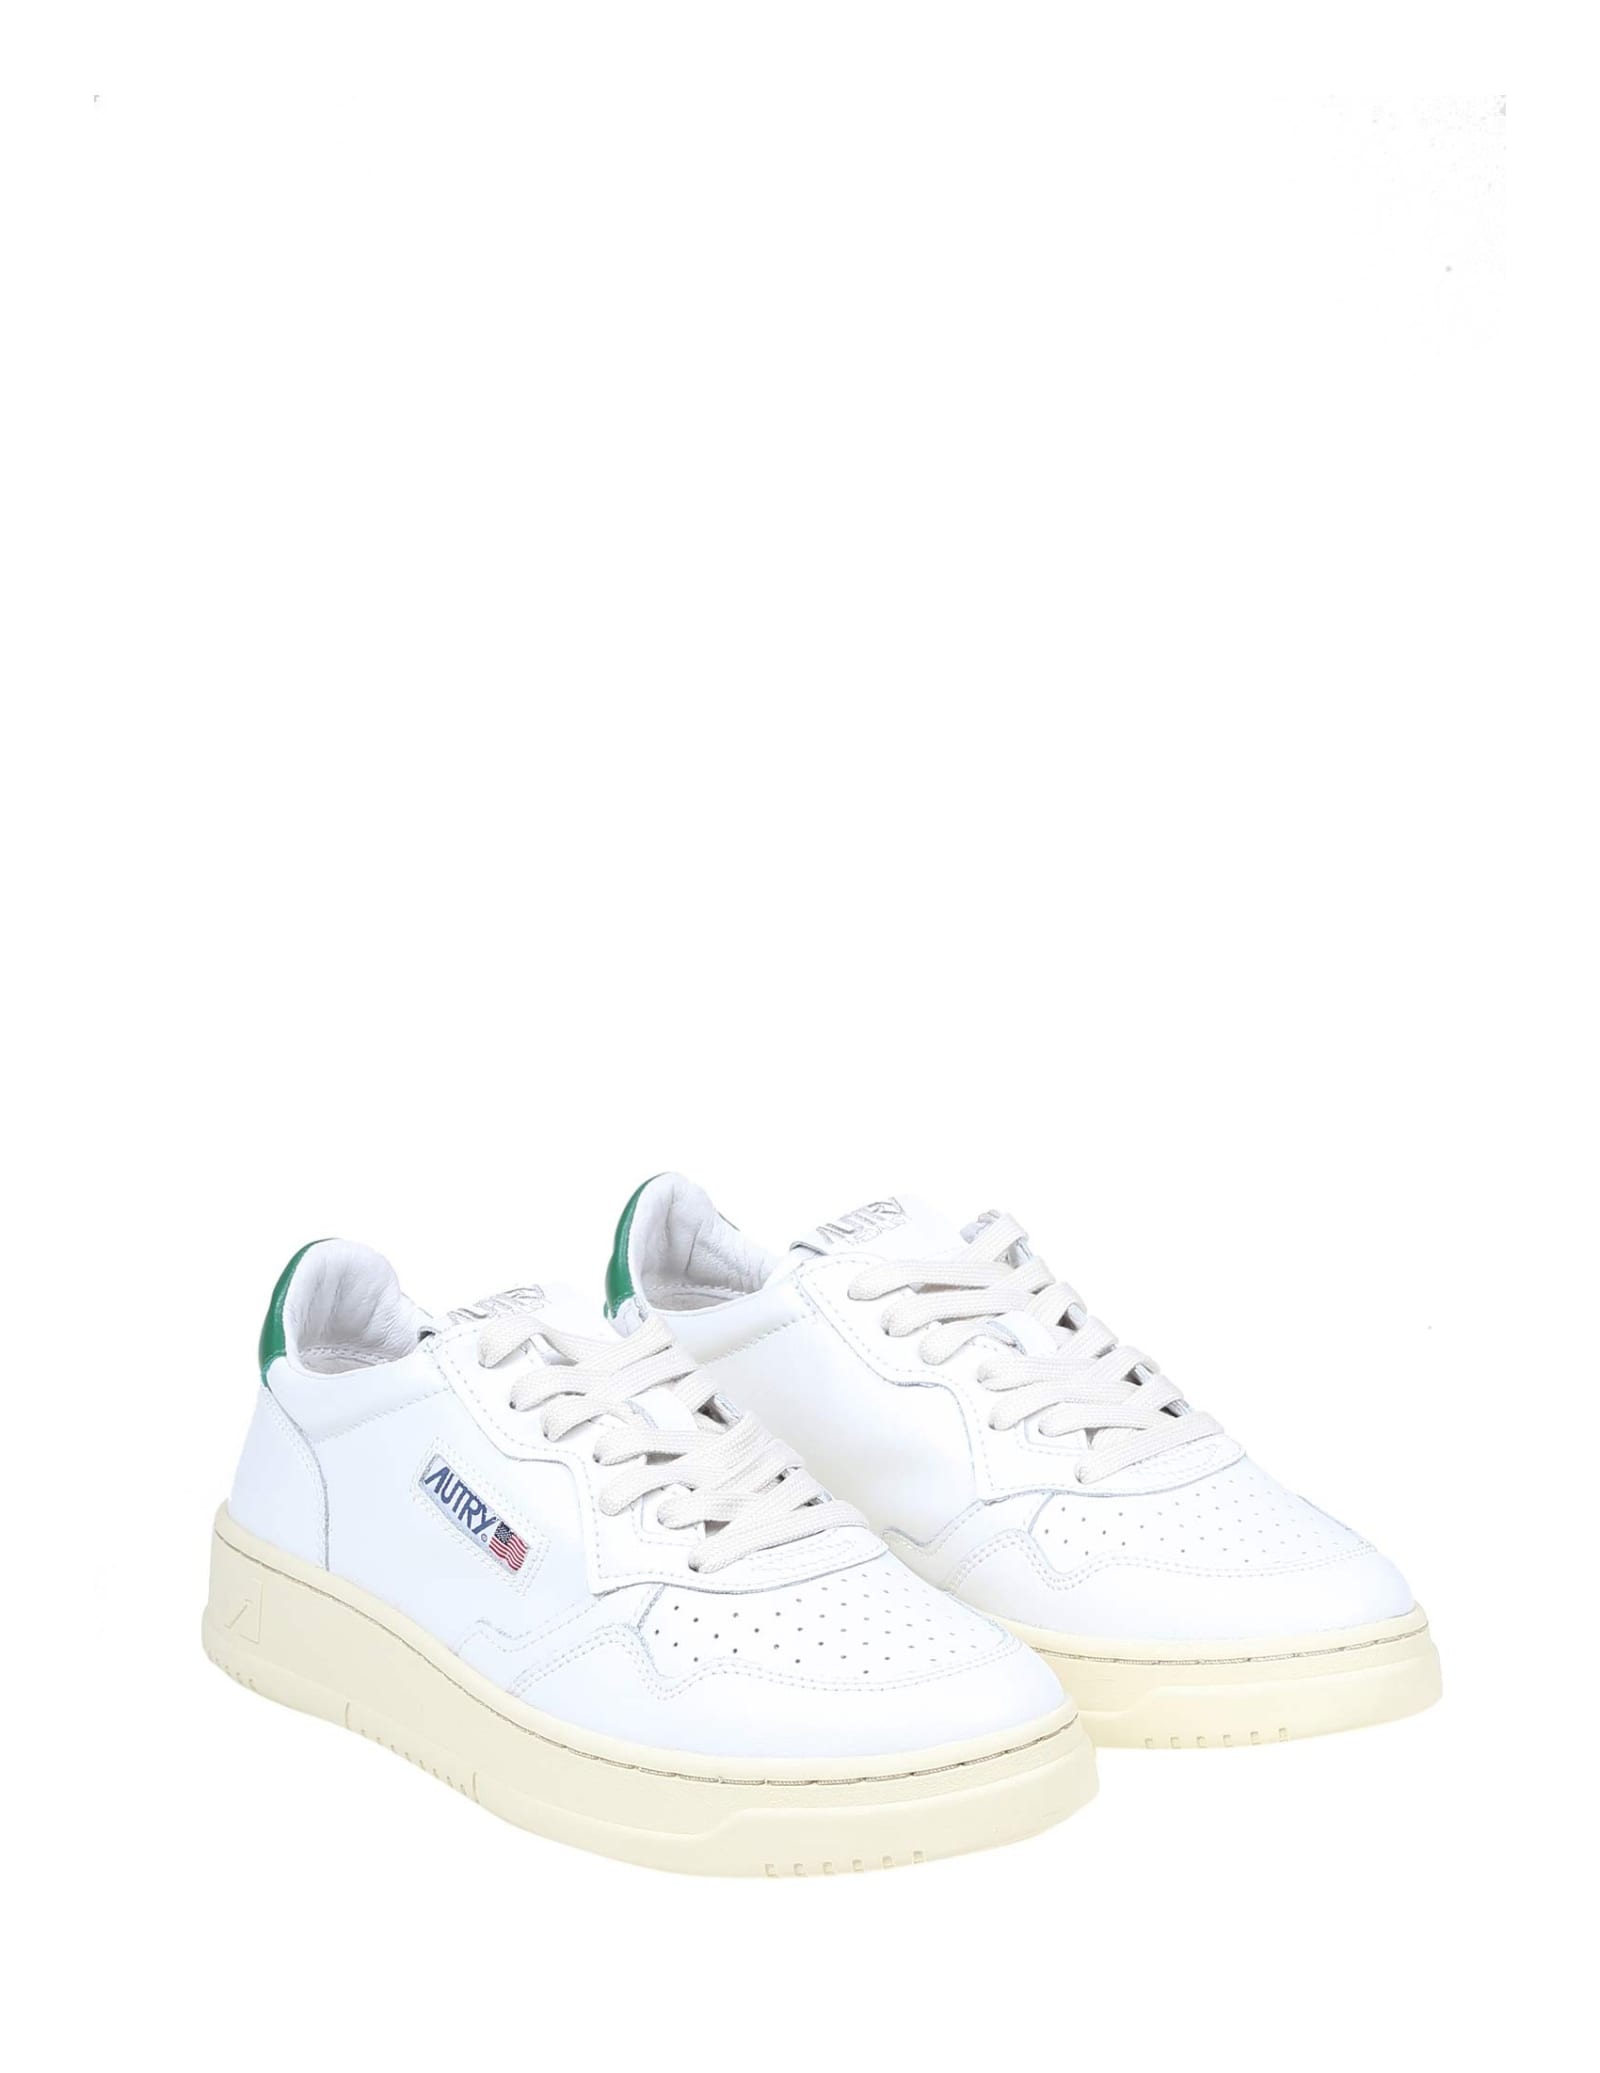 Shop Autry Sneakers In White And Green Leather In White/green